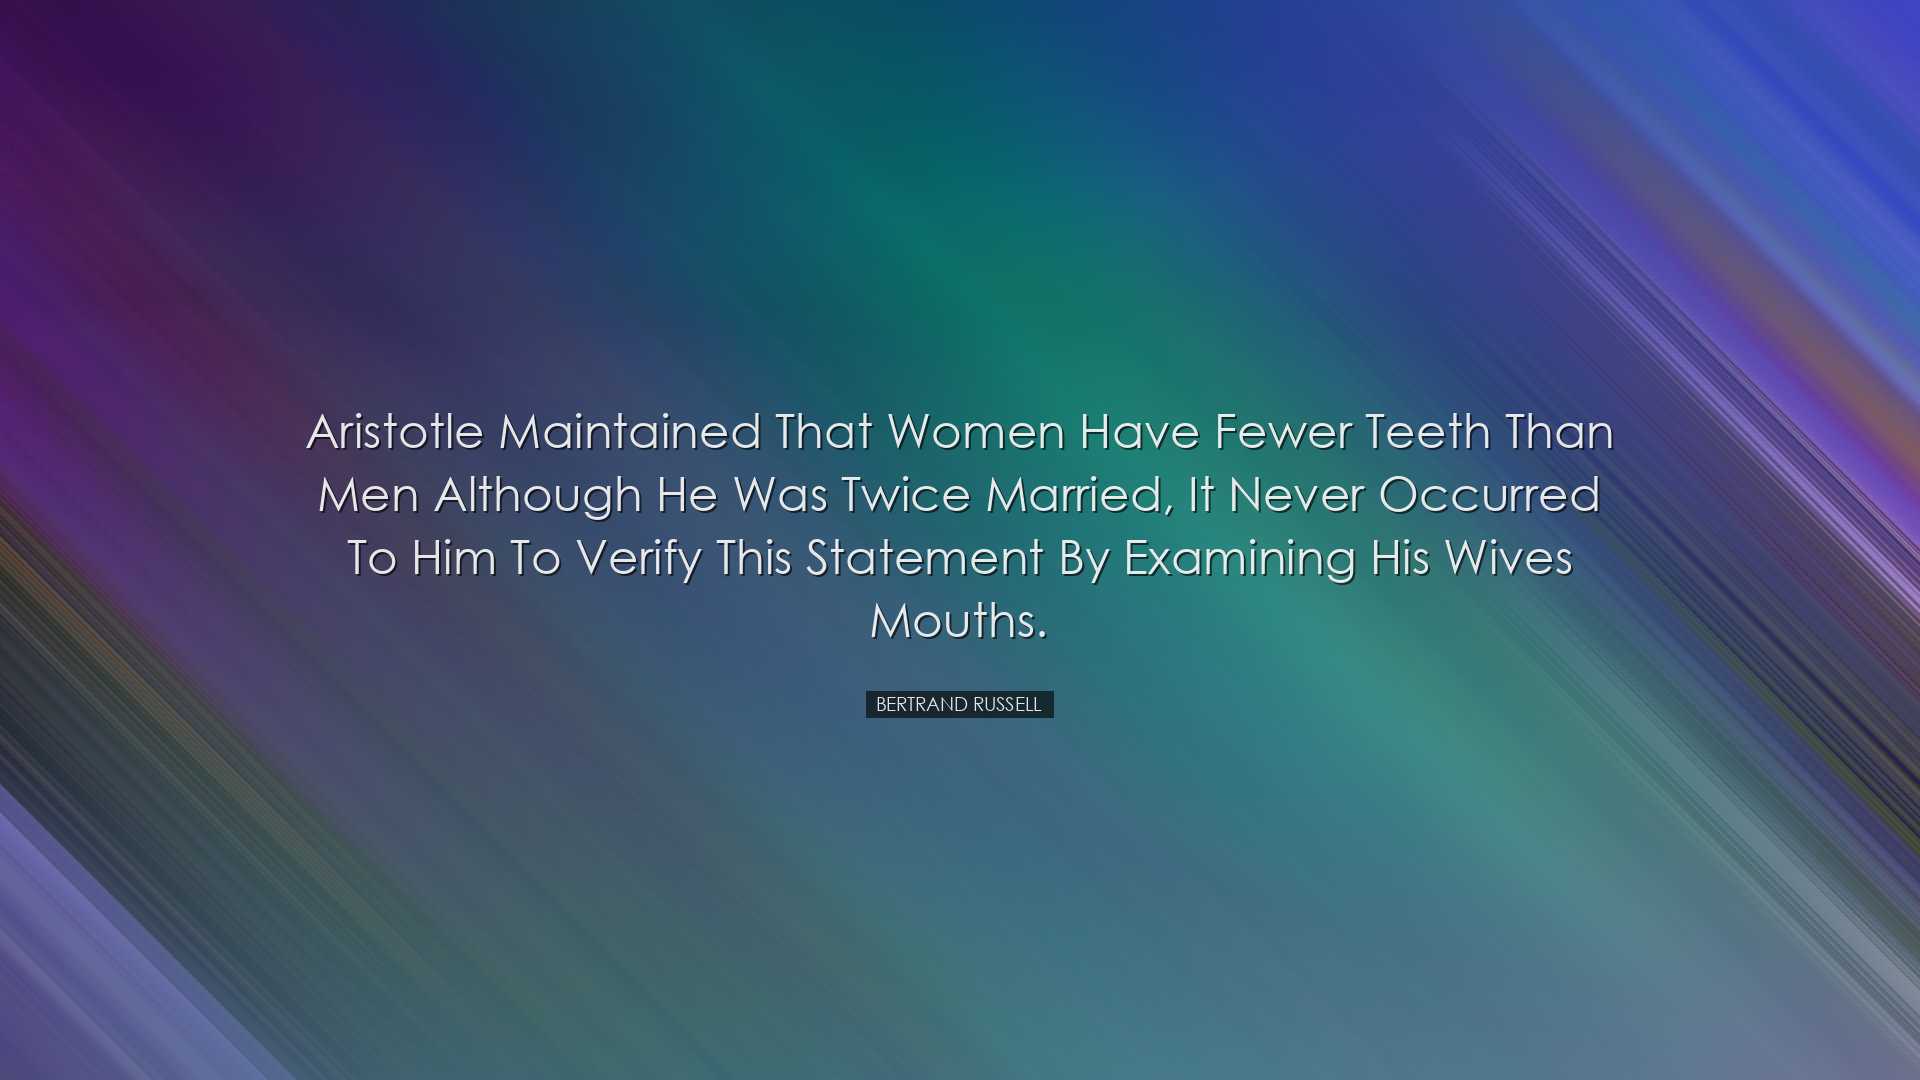 Aristotle maintained that women have fewer teeth than men although